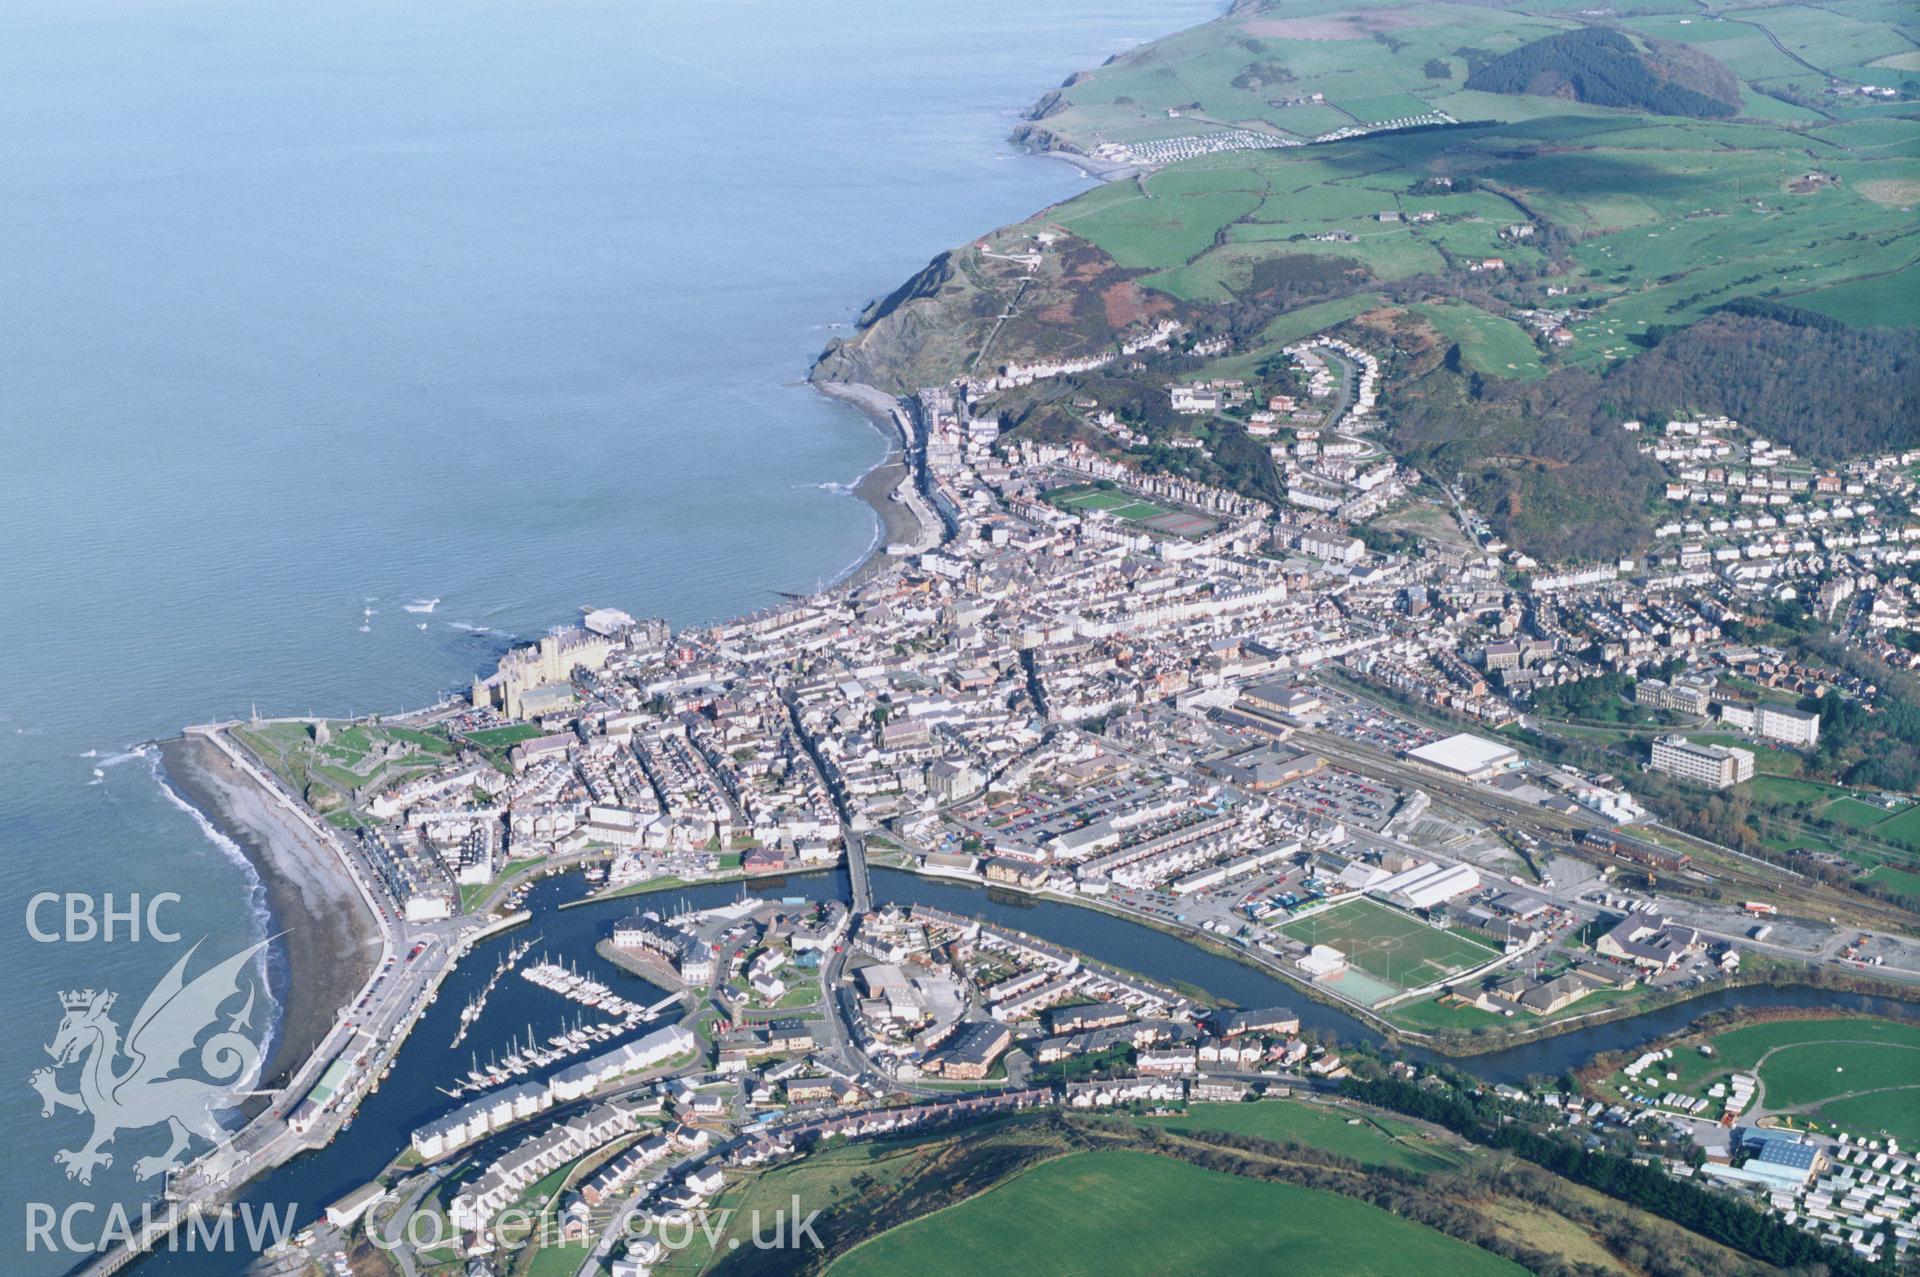 Slide of RCAHMW colour oblique aerial photograph of Aberystwyth, taken by T.G. Driver, 2002.